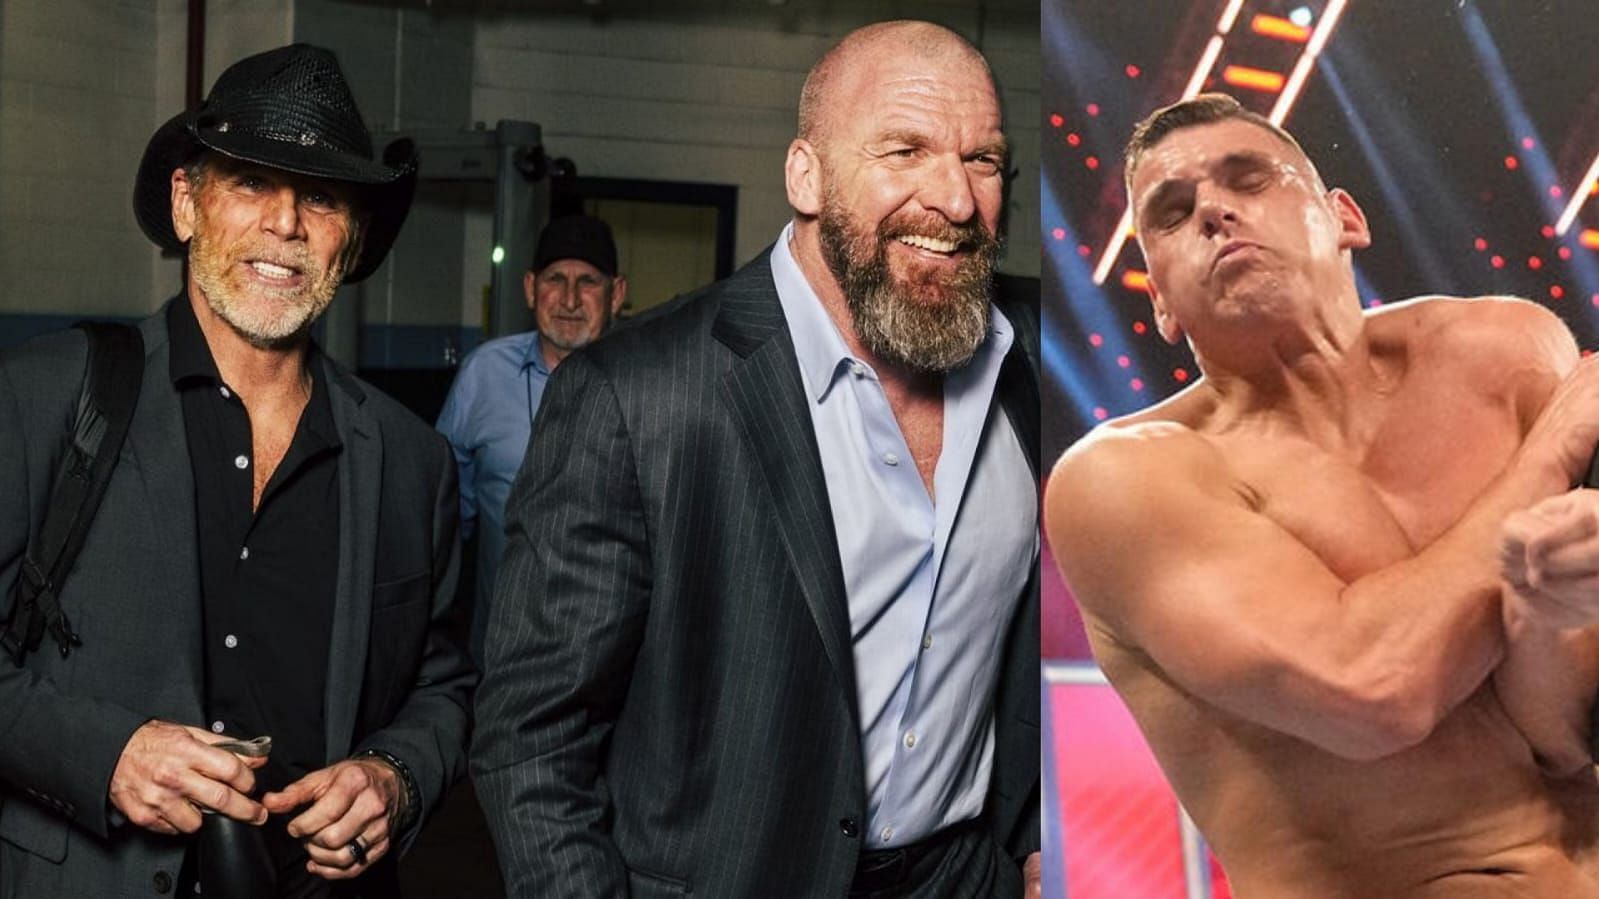 Shawn Michaels and Triple H share a laugh backstage at WWE event